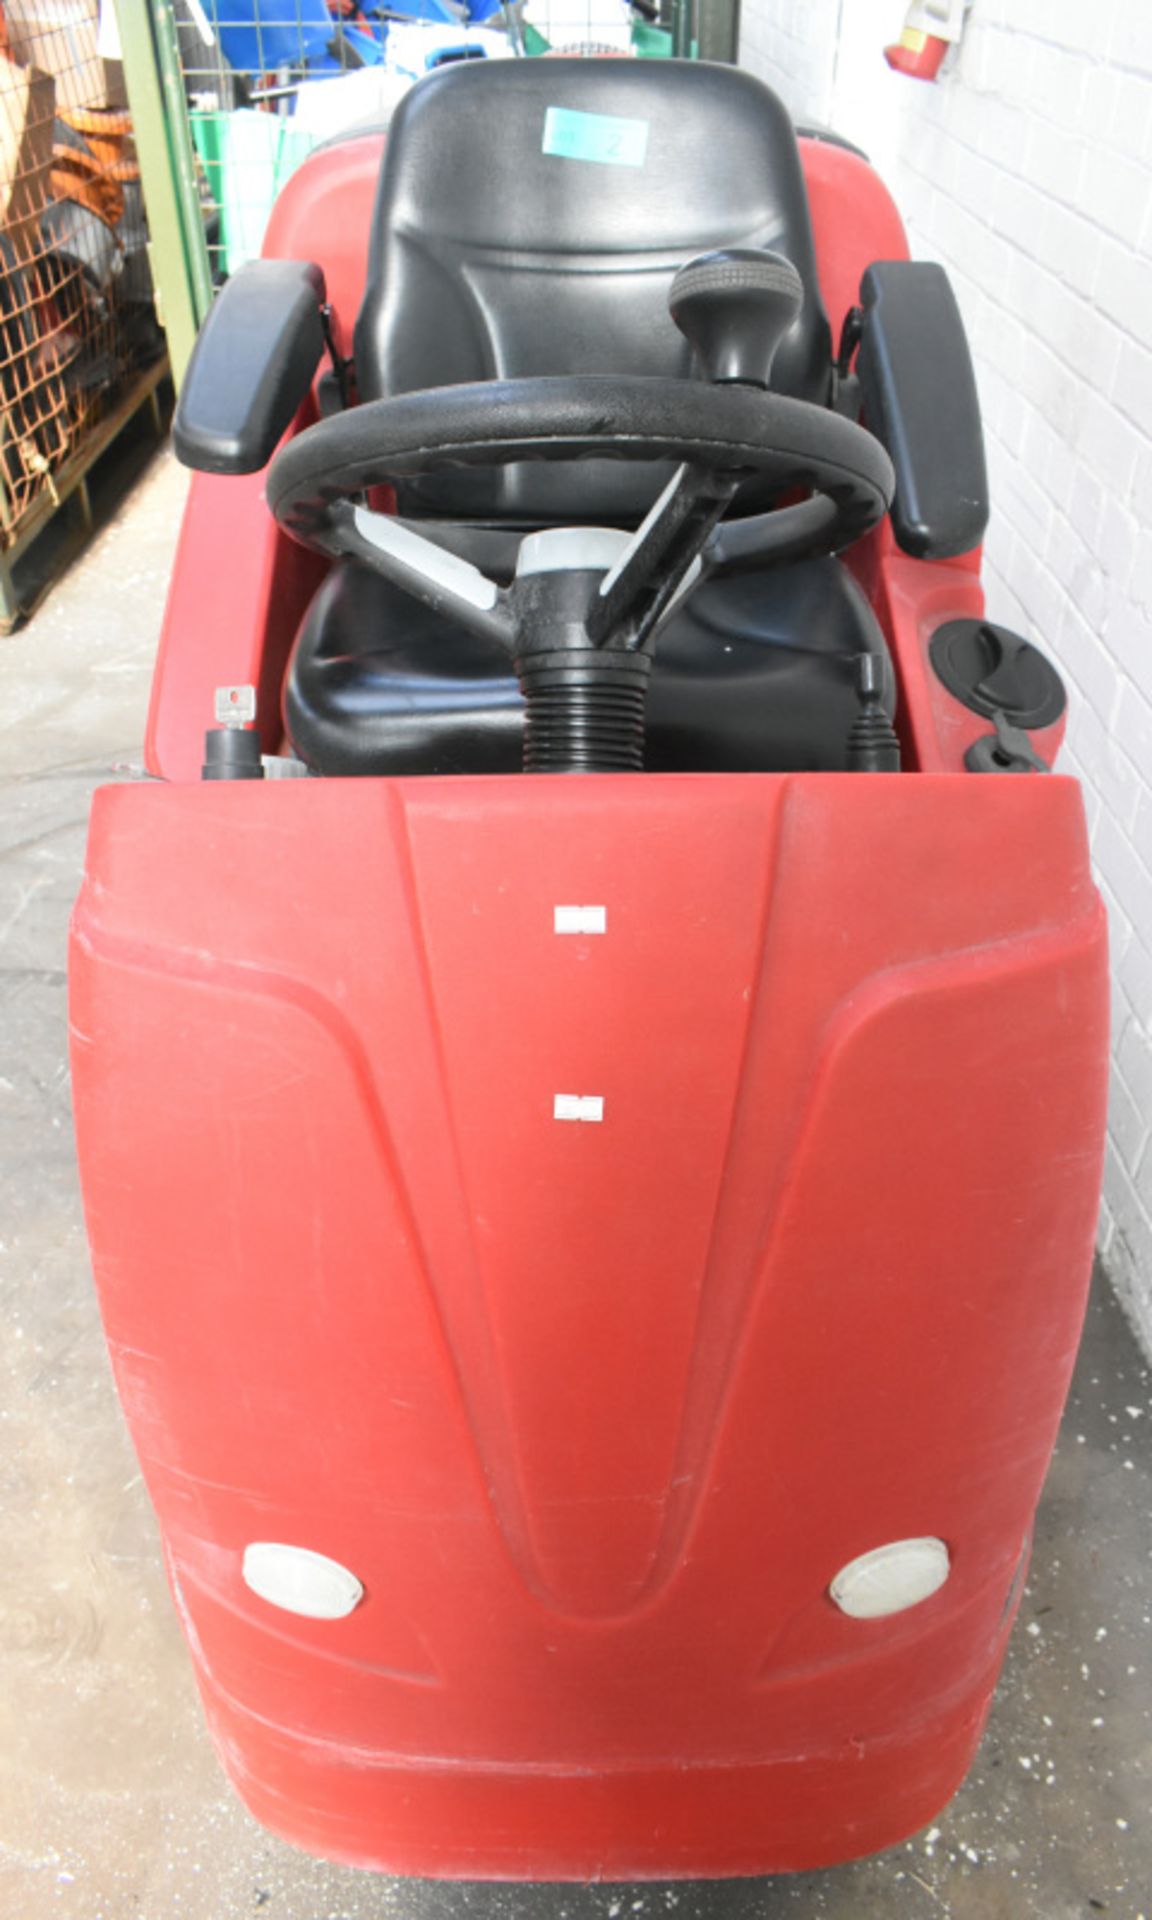 Comac Optima 100B Floor Scrubber Dryer, Does Not Power Up, See Pictures For Damage - Image 6 of 15